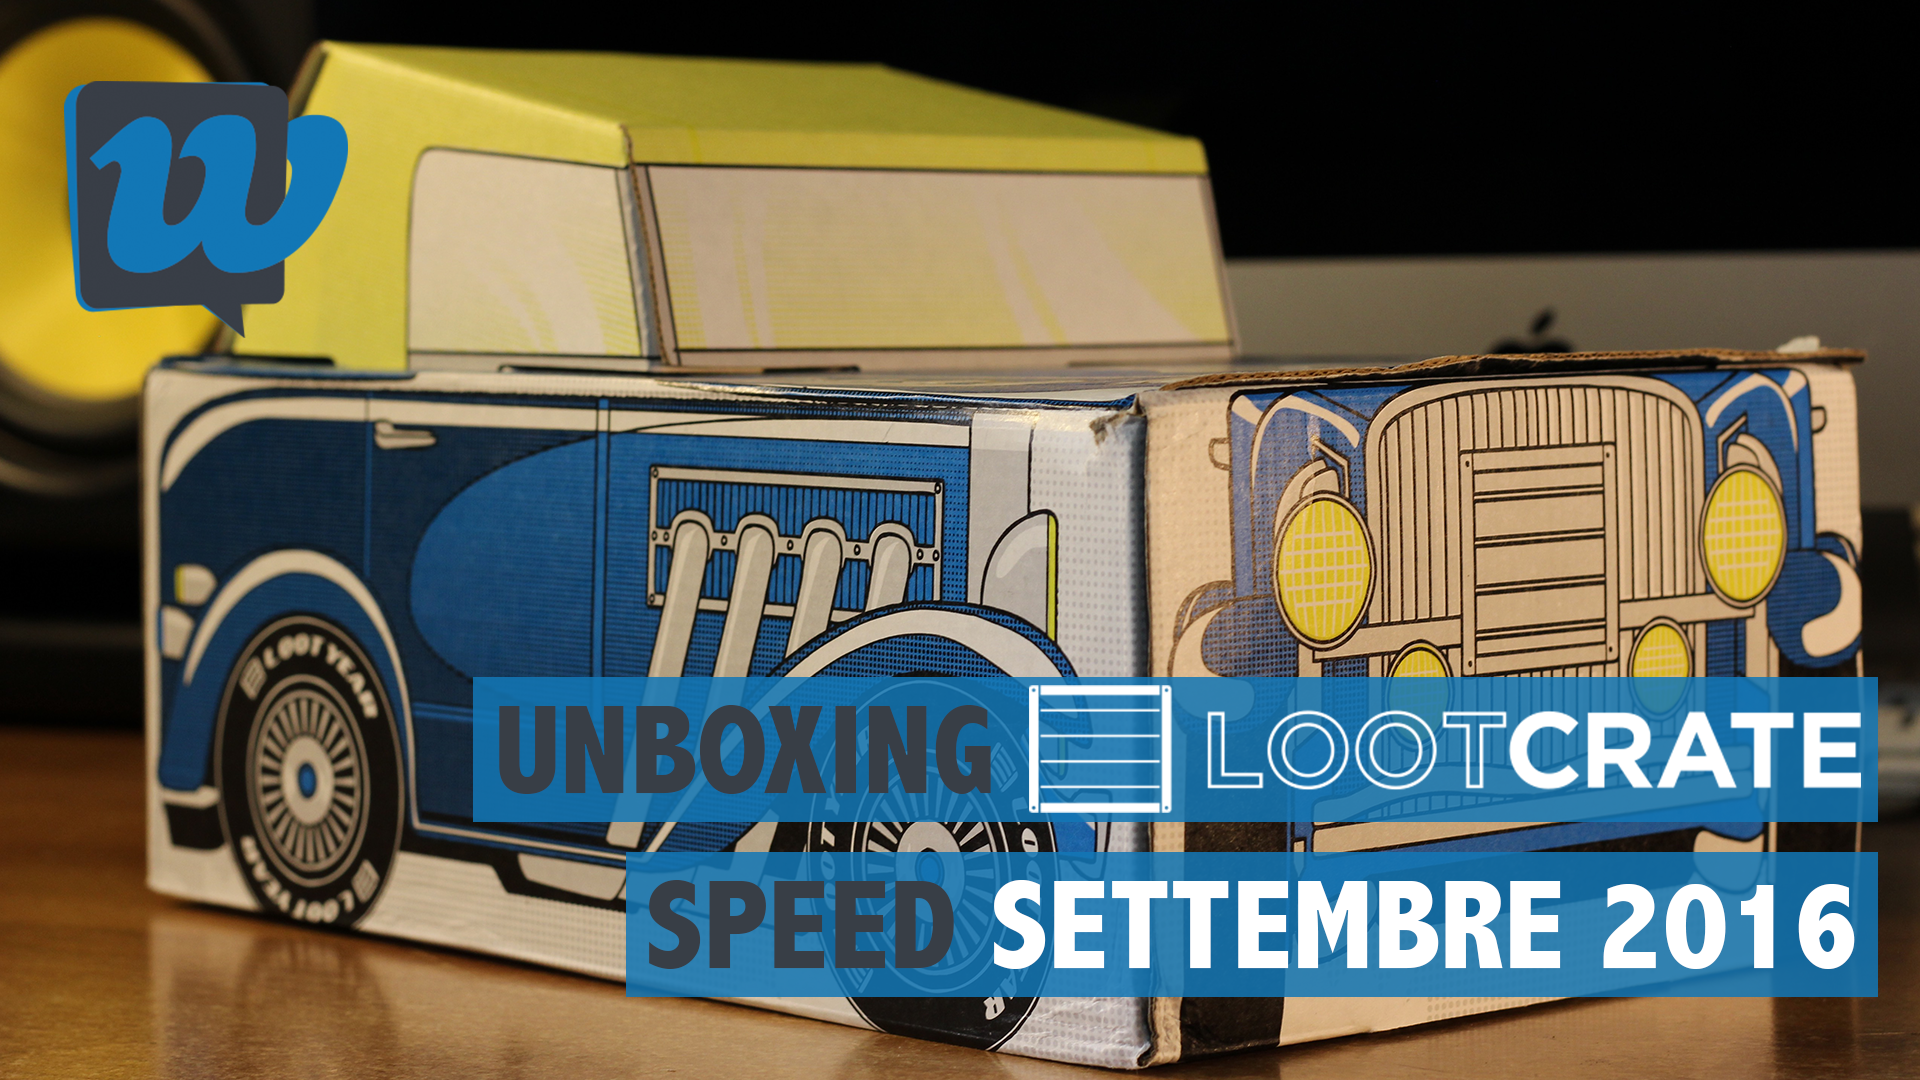 Unboxing Loot Crate settembre 2016: Speed